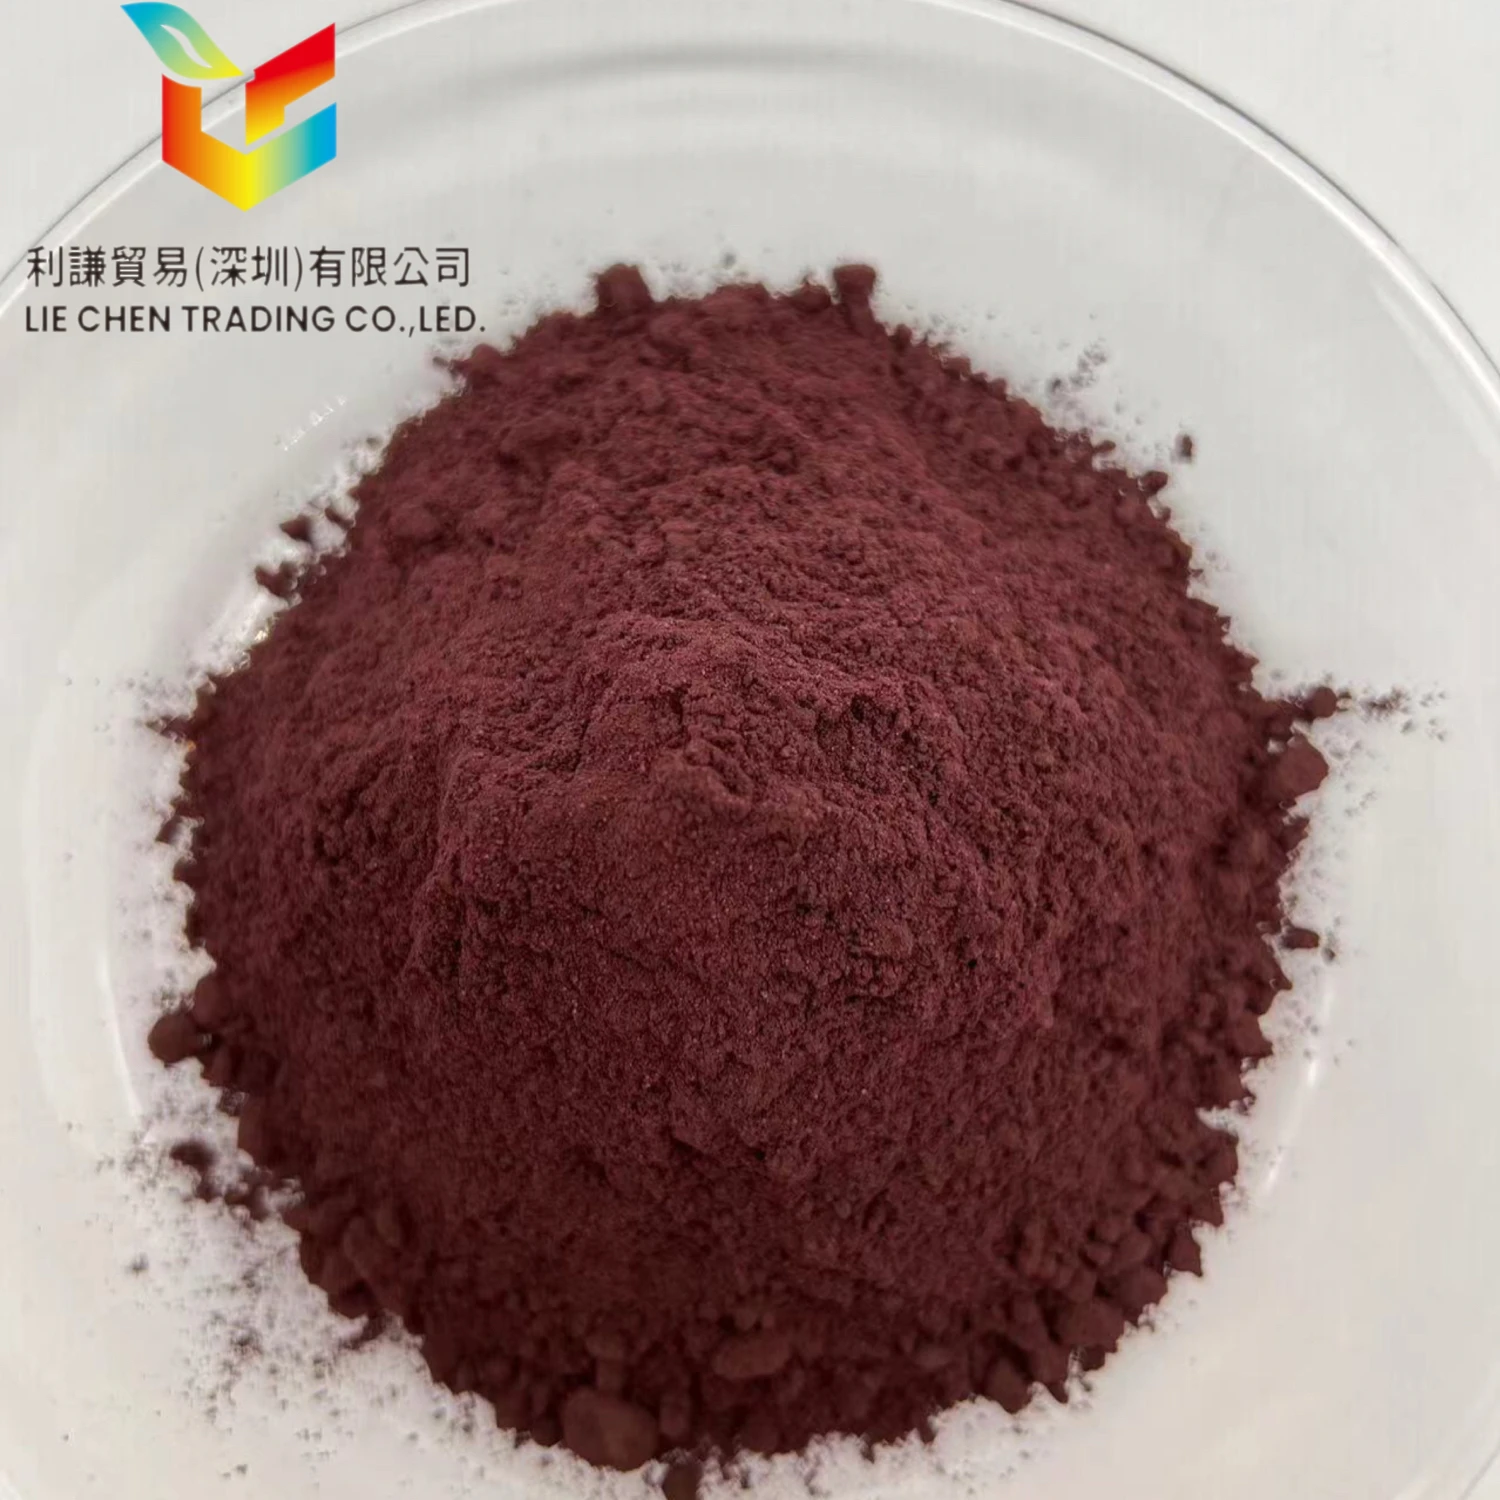 Reactive Red Dye Powder for Fabric, Food, Leather 